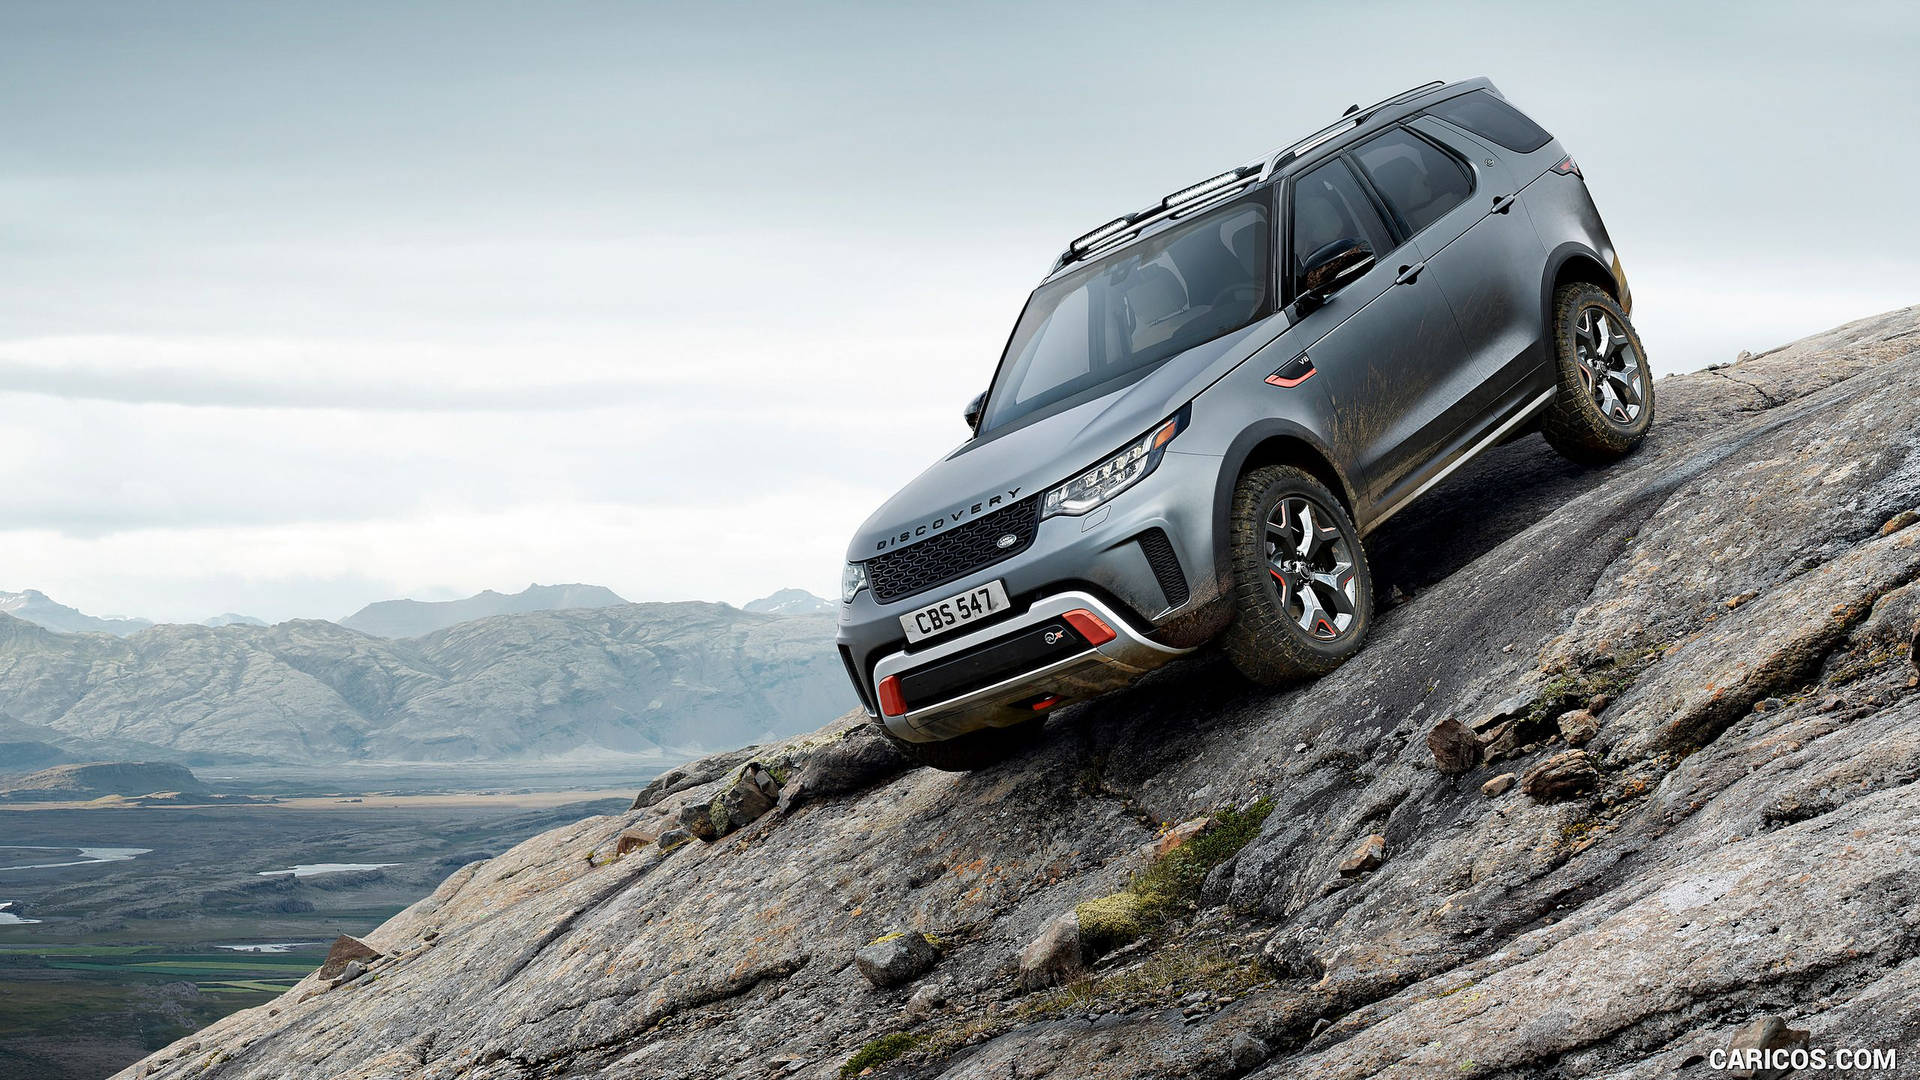 Sovereign Luxury driving in a Gray Land Rover Discovery SVX Wallpaper